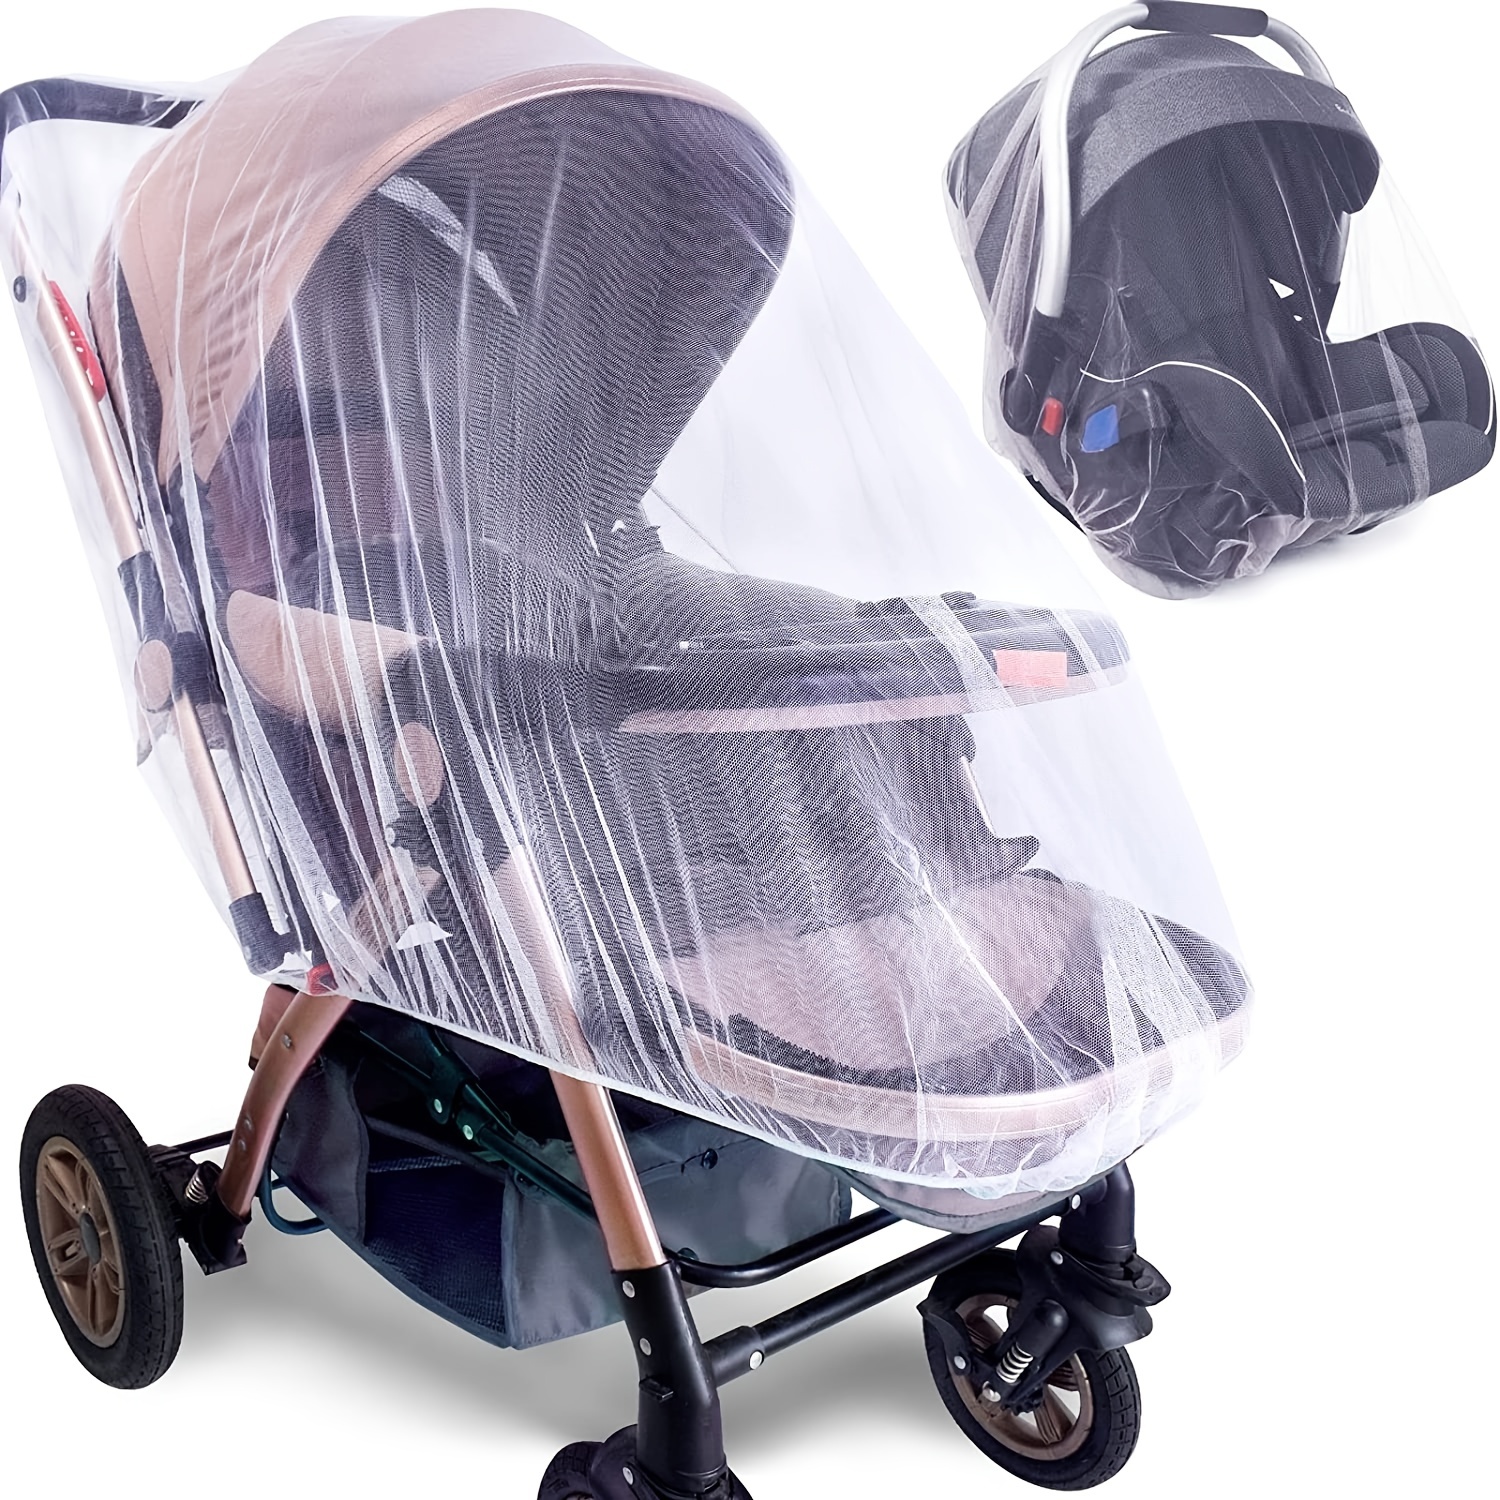 fana123 Mosquito Net For Stroller - Durable Baby Stroller Mosquito Net